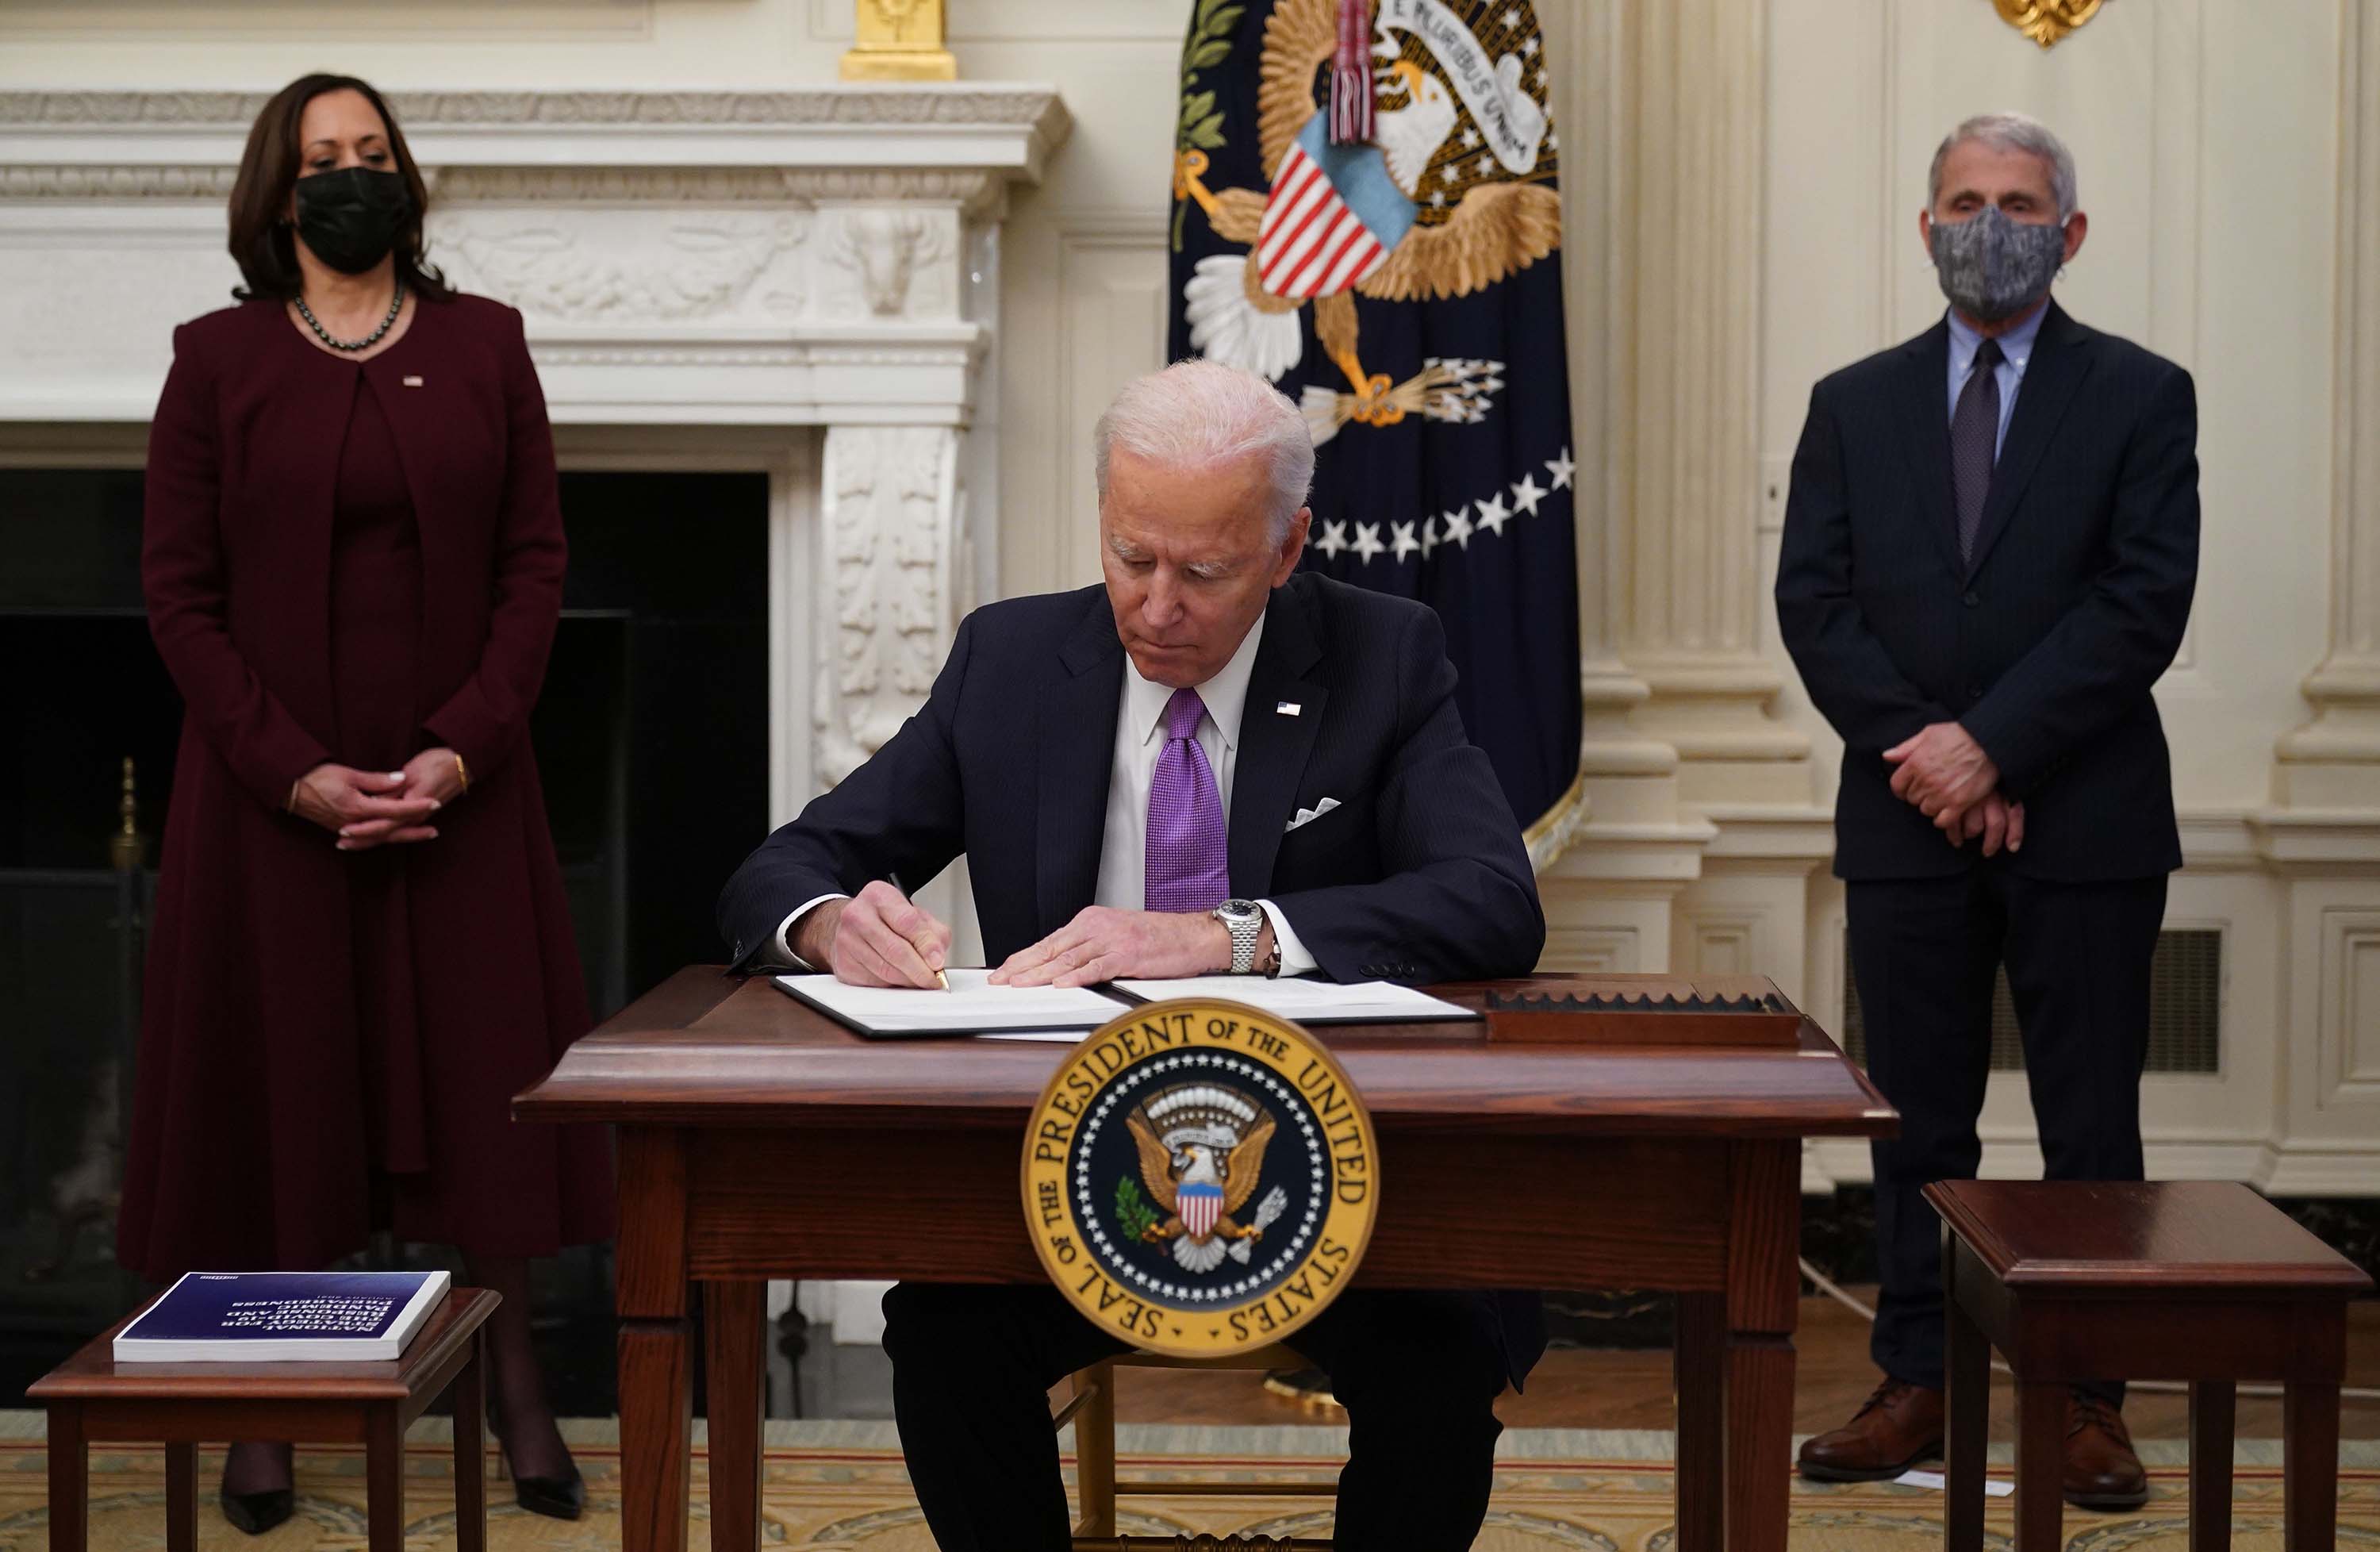 President Joe Biden signs executive orders as part of the Covid-19 response, as Vice President Kamala Harris, left, and Dr. Anthony Fauci look on, at the White House in Washington, DC, on January 21.